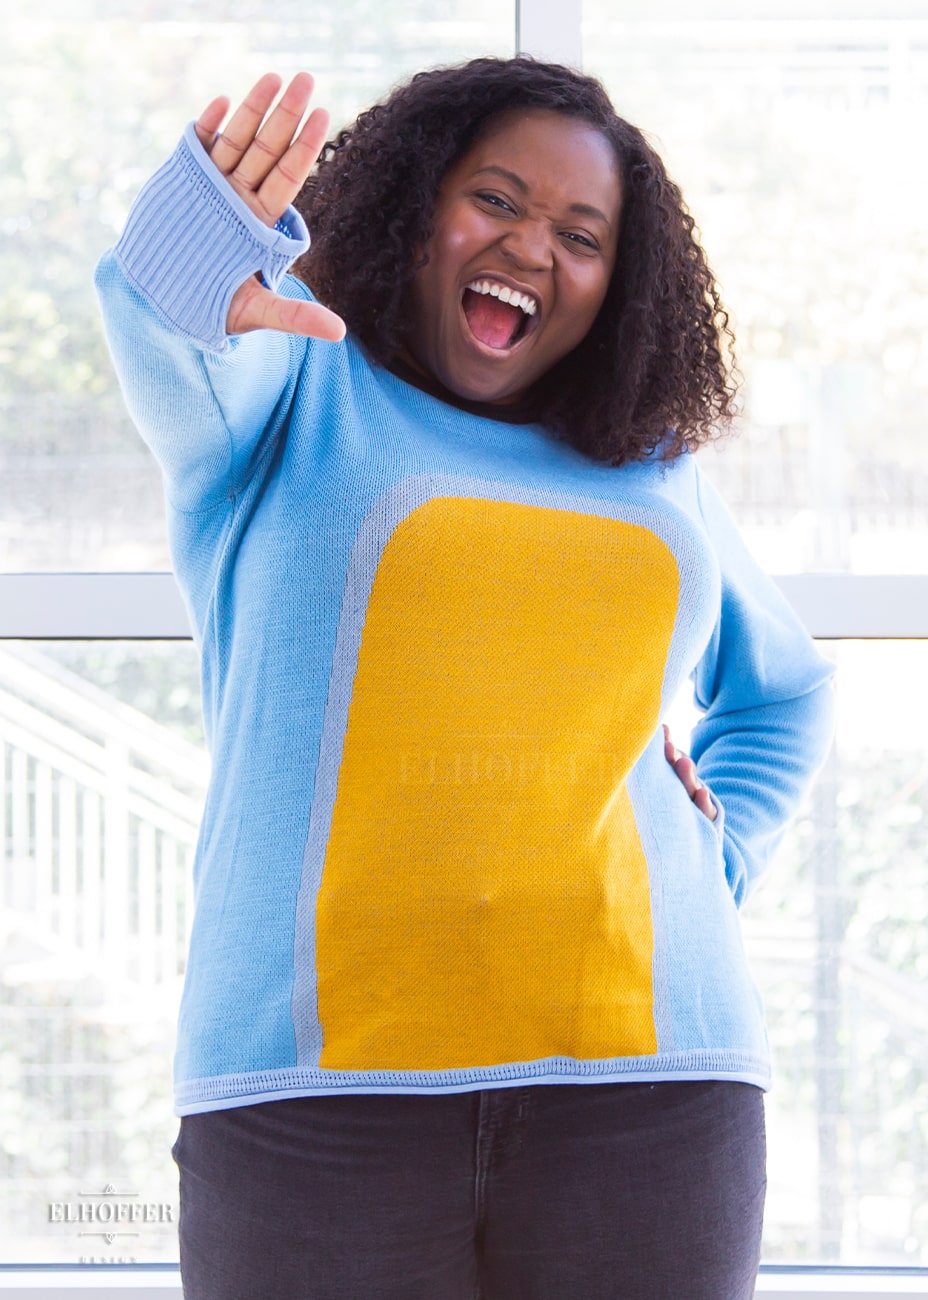 Maydelle, a medium dark skinned XL model with shoulder length curly dark brown hair, is wearing a fitted long sleeve knit sweater with wide crew neck and rolled edges and thumbholes in the sleeve. It is a medium blue with light blue cuffs and detail around the yellow oval in the middle of the sweater. It also has a black neck and black spot in the middle of the back.